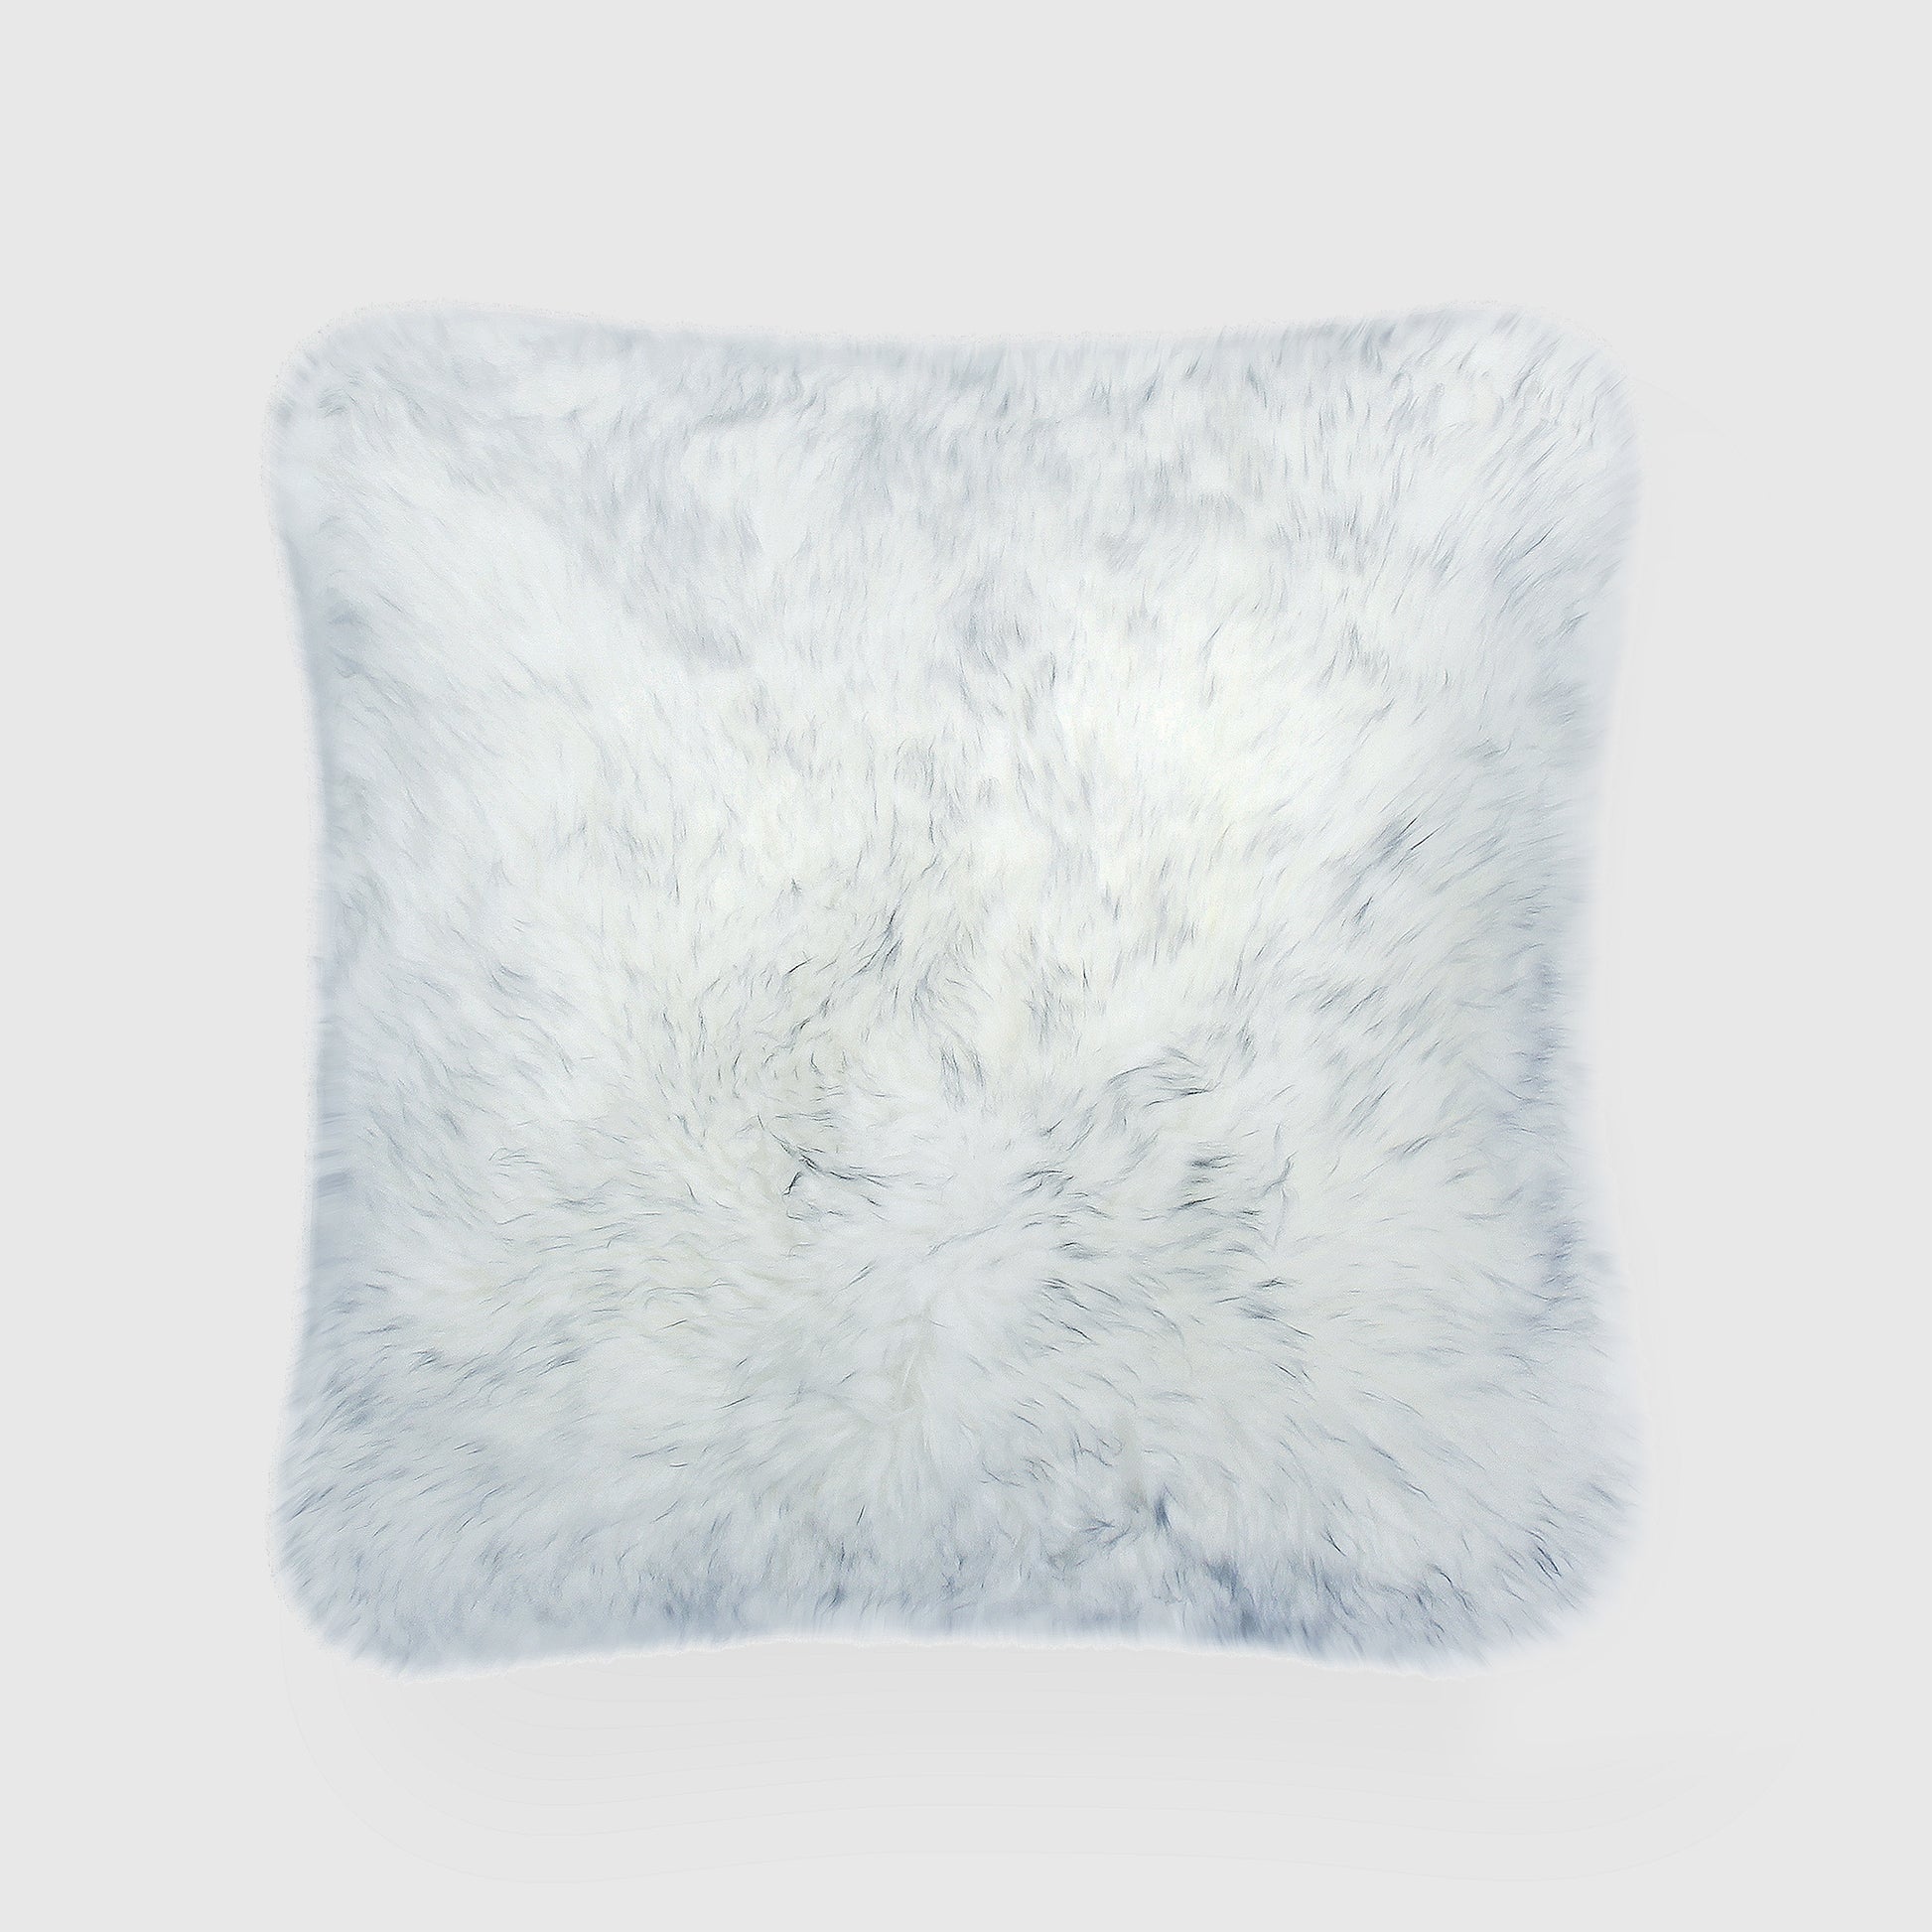 The Mood | Charlie Sheepskin Double-sided 18"x18" Pillow, Gray Mist